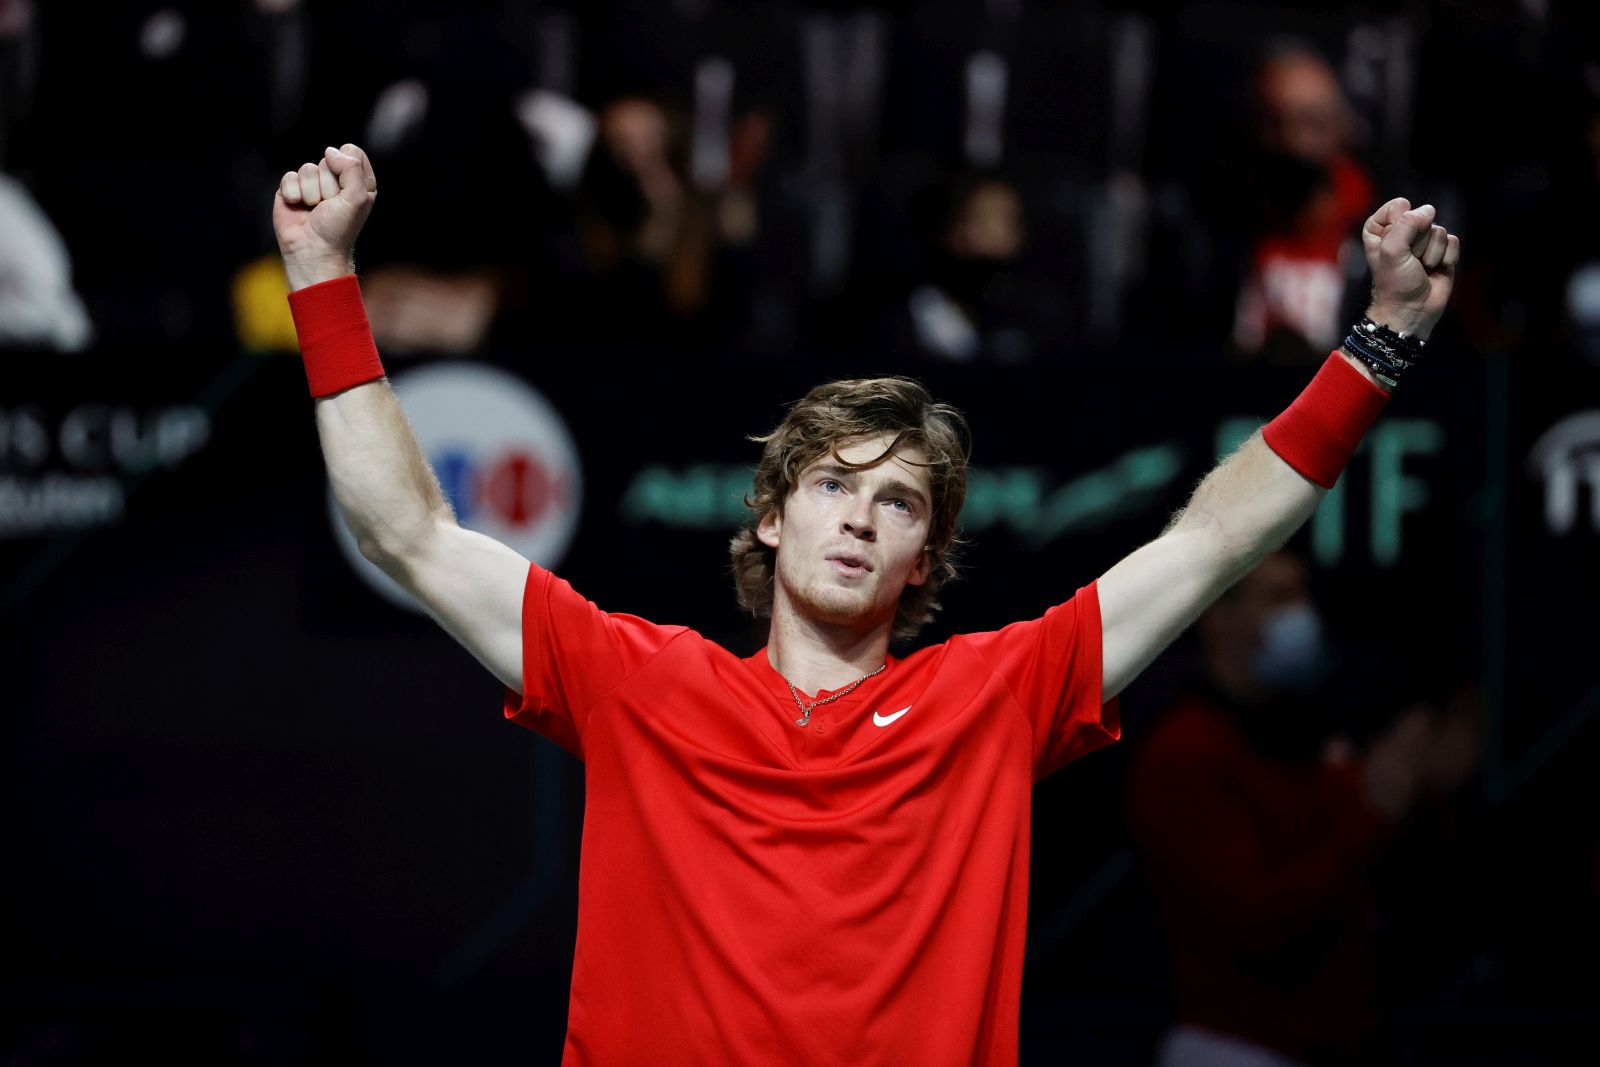 epa09620859 Andrey Rublev from Russia celebrates winning against Dominik Koepfer from Germany after their singles match for the semi final Davis Cup tie between Russia and Germany held at Madrid Arena sports pavilion in Madrid, central Spain, 04 December 2021.  EPA/EMILIO NARANJO